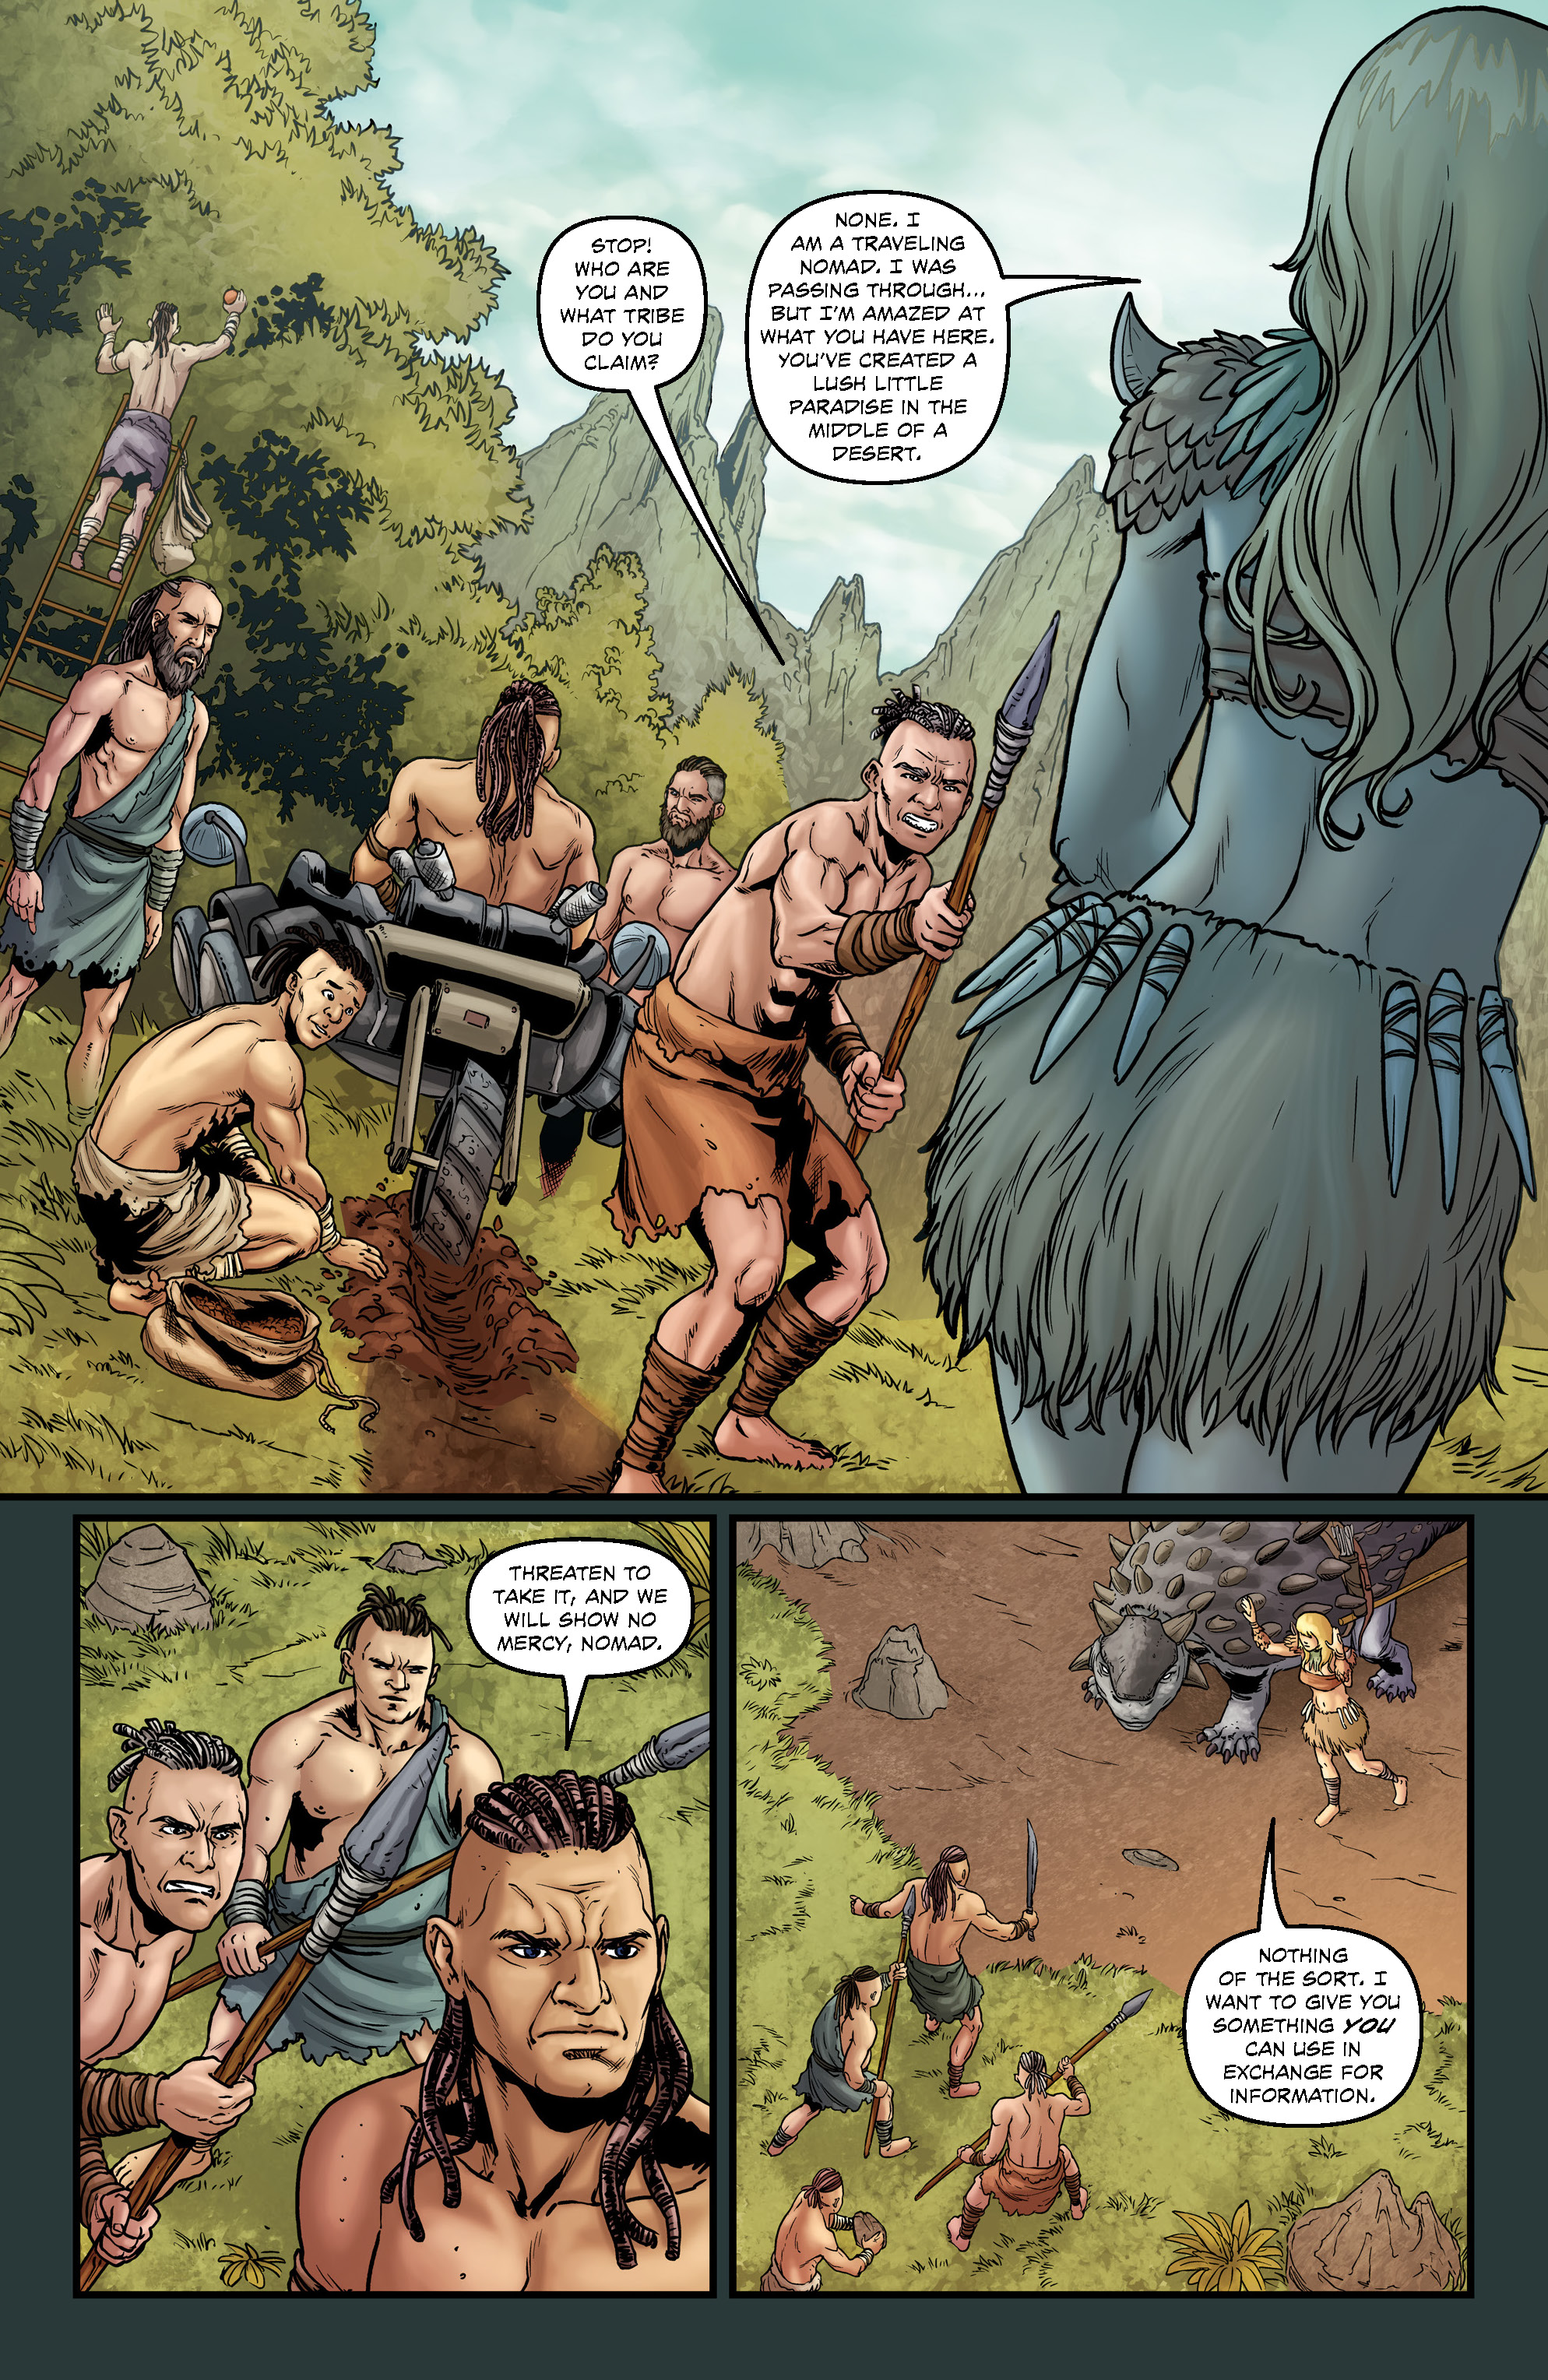 Jungle Fantasy Annual 2019 (ADULT): Chapter 1 - Page 5.